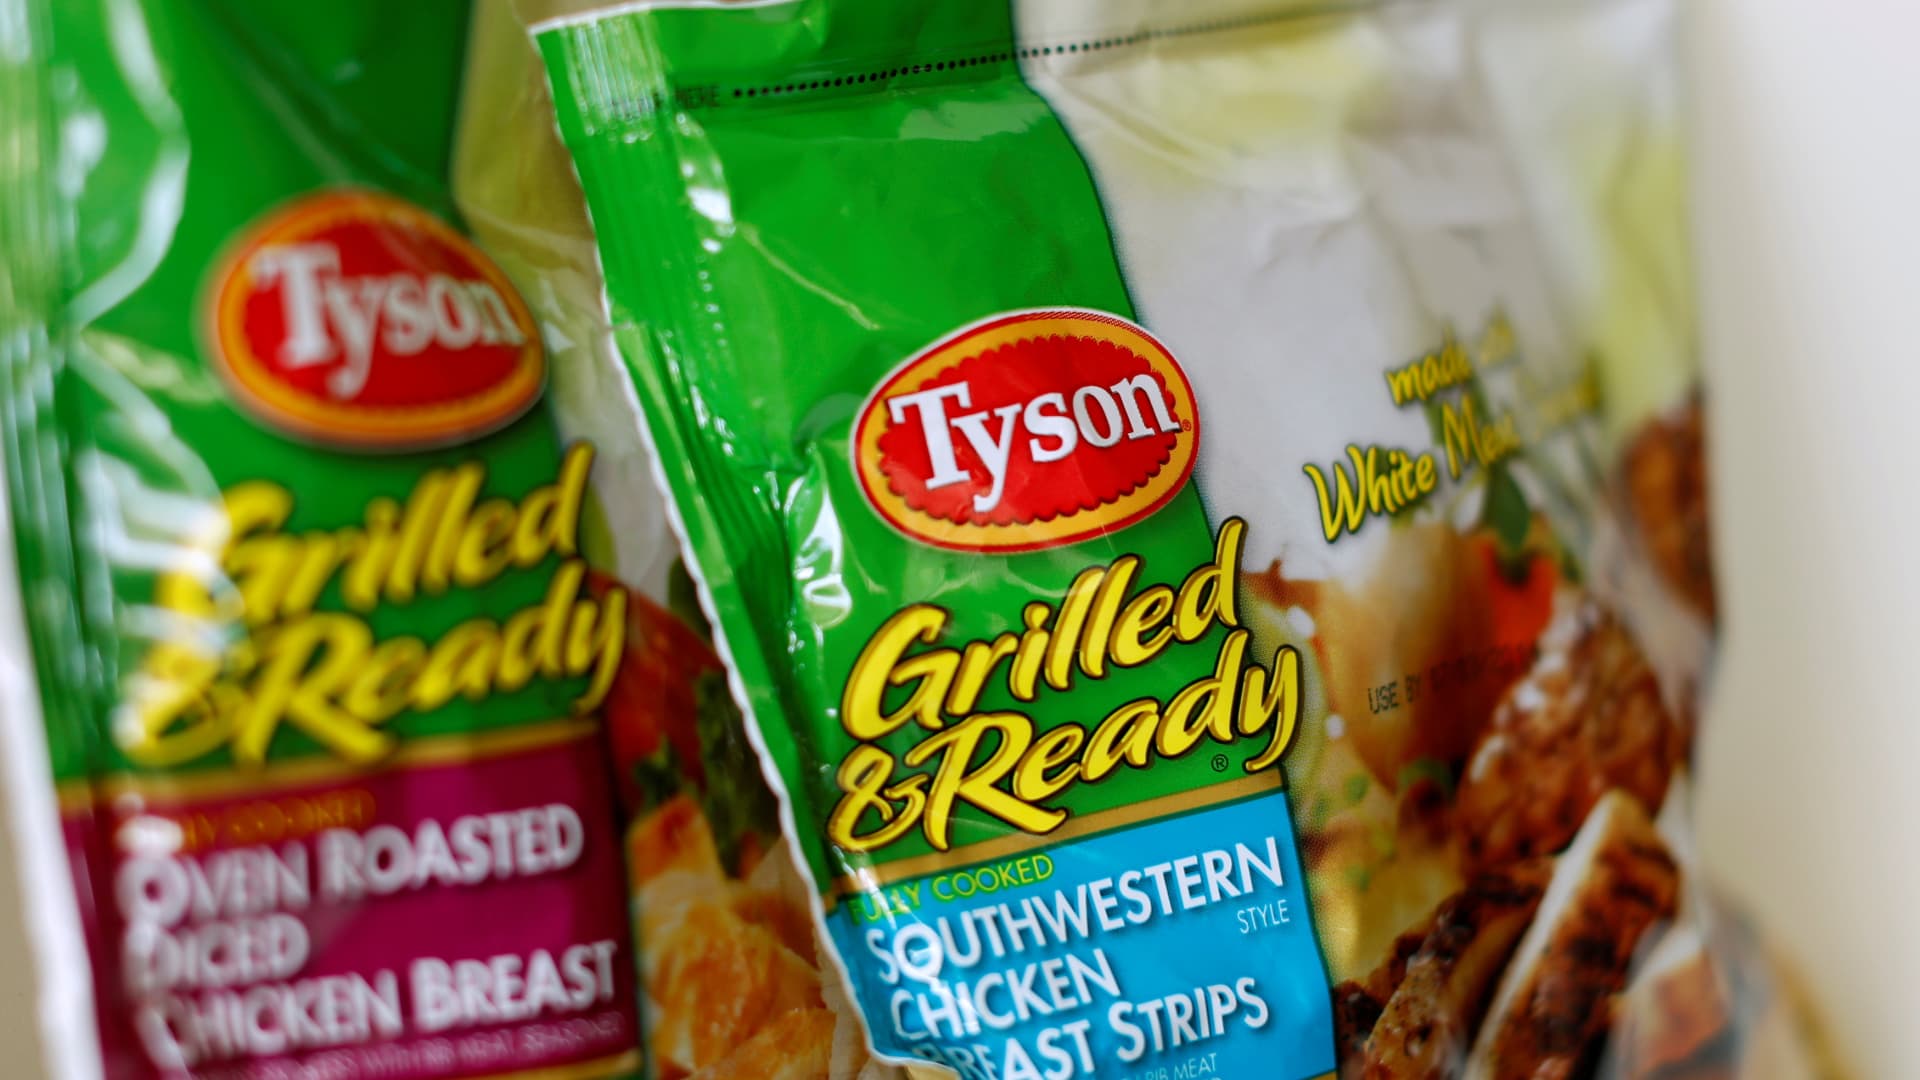 Tyson food meat products are shown in this photo illustration in Encinitas, California.